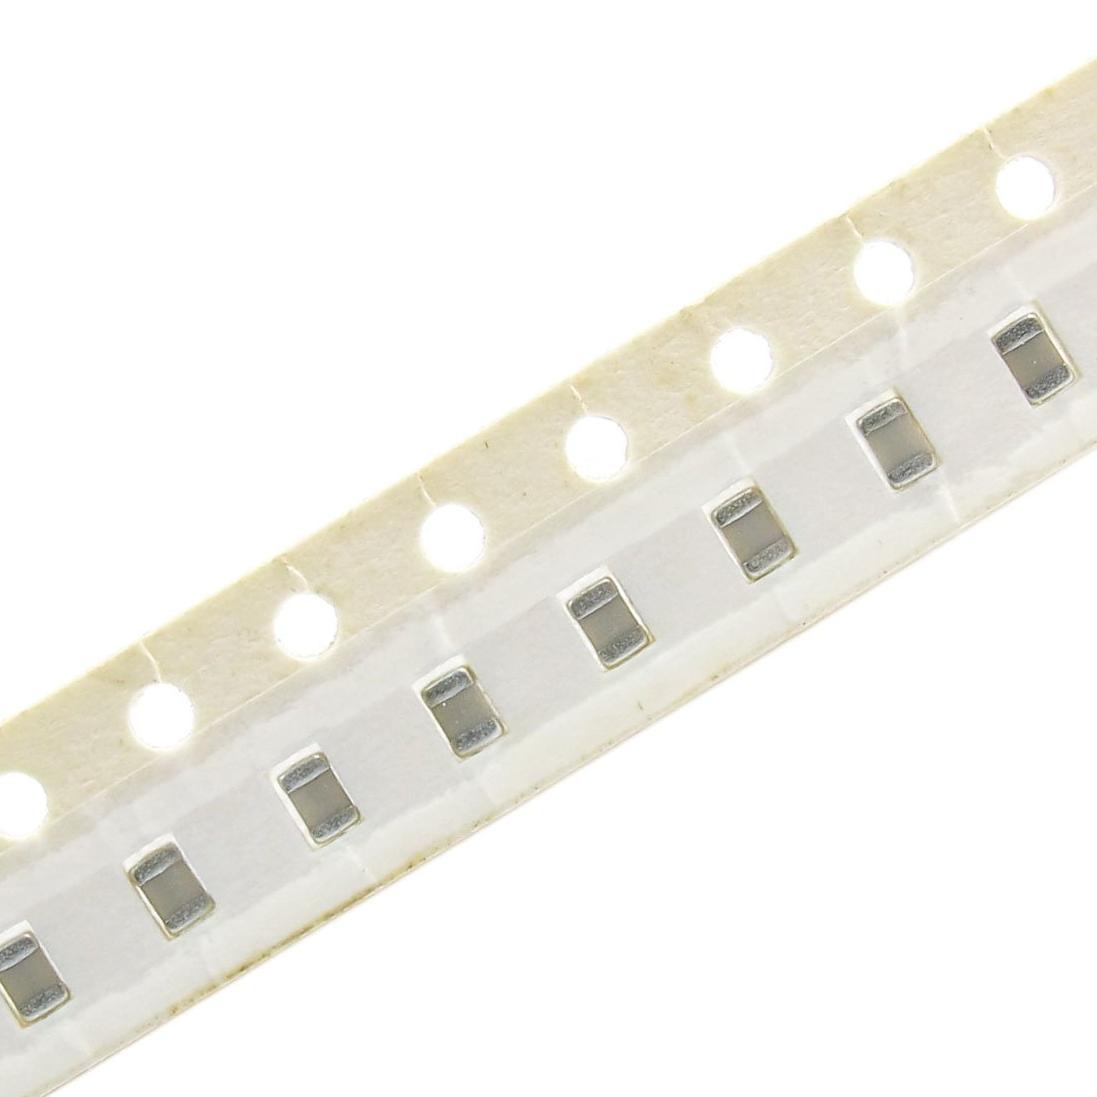  SMD 15pF 0805 C0G(NP0)